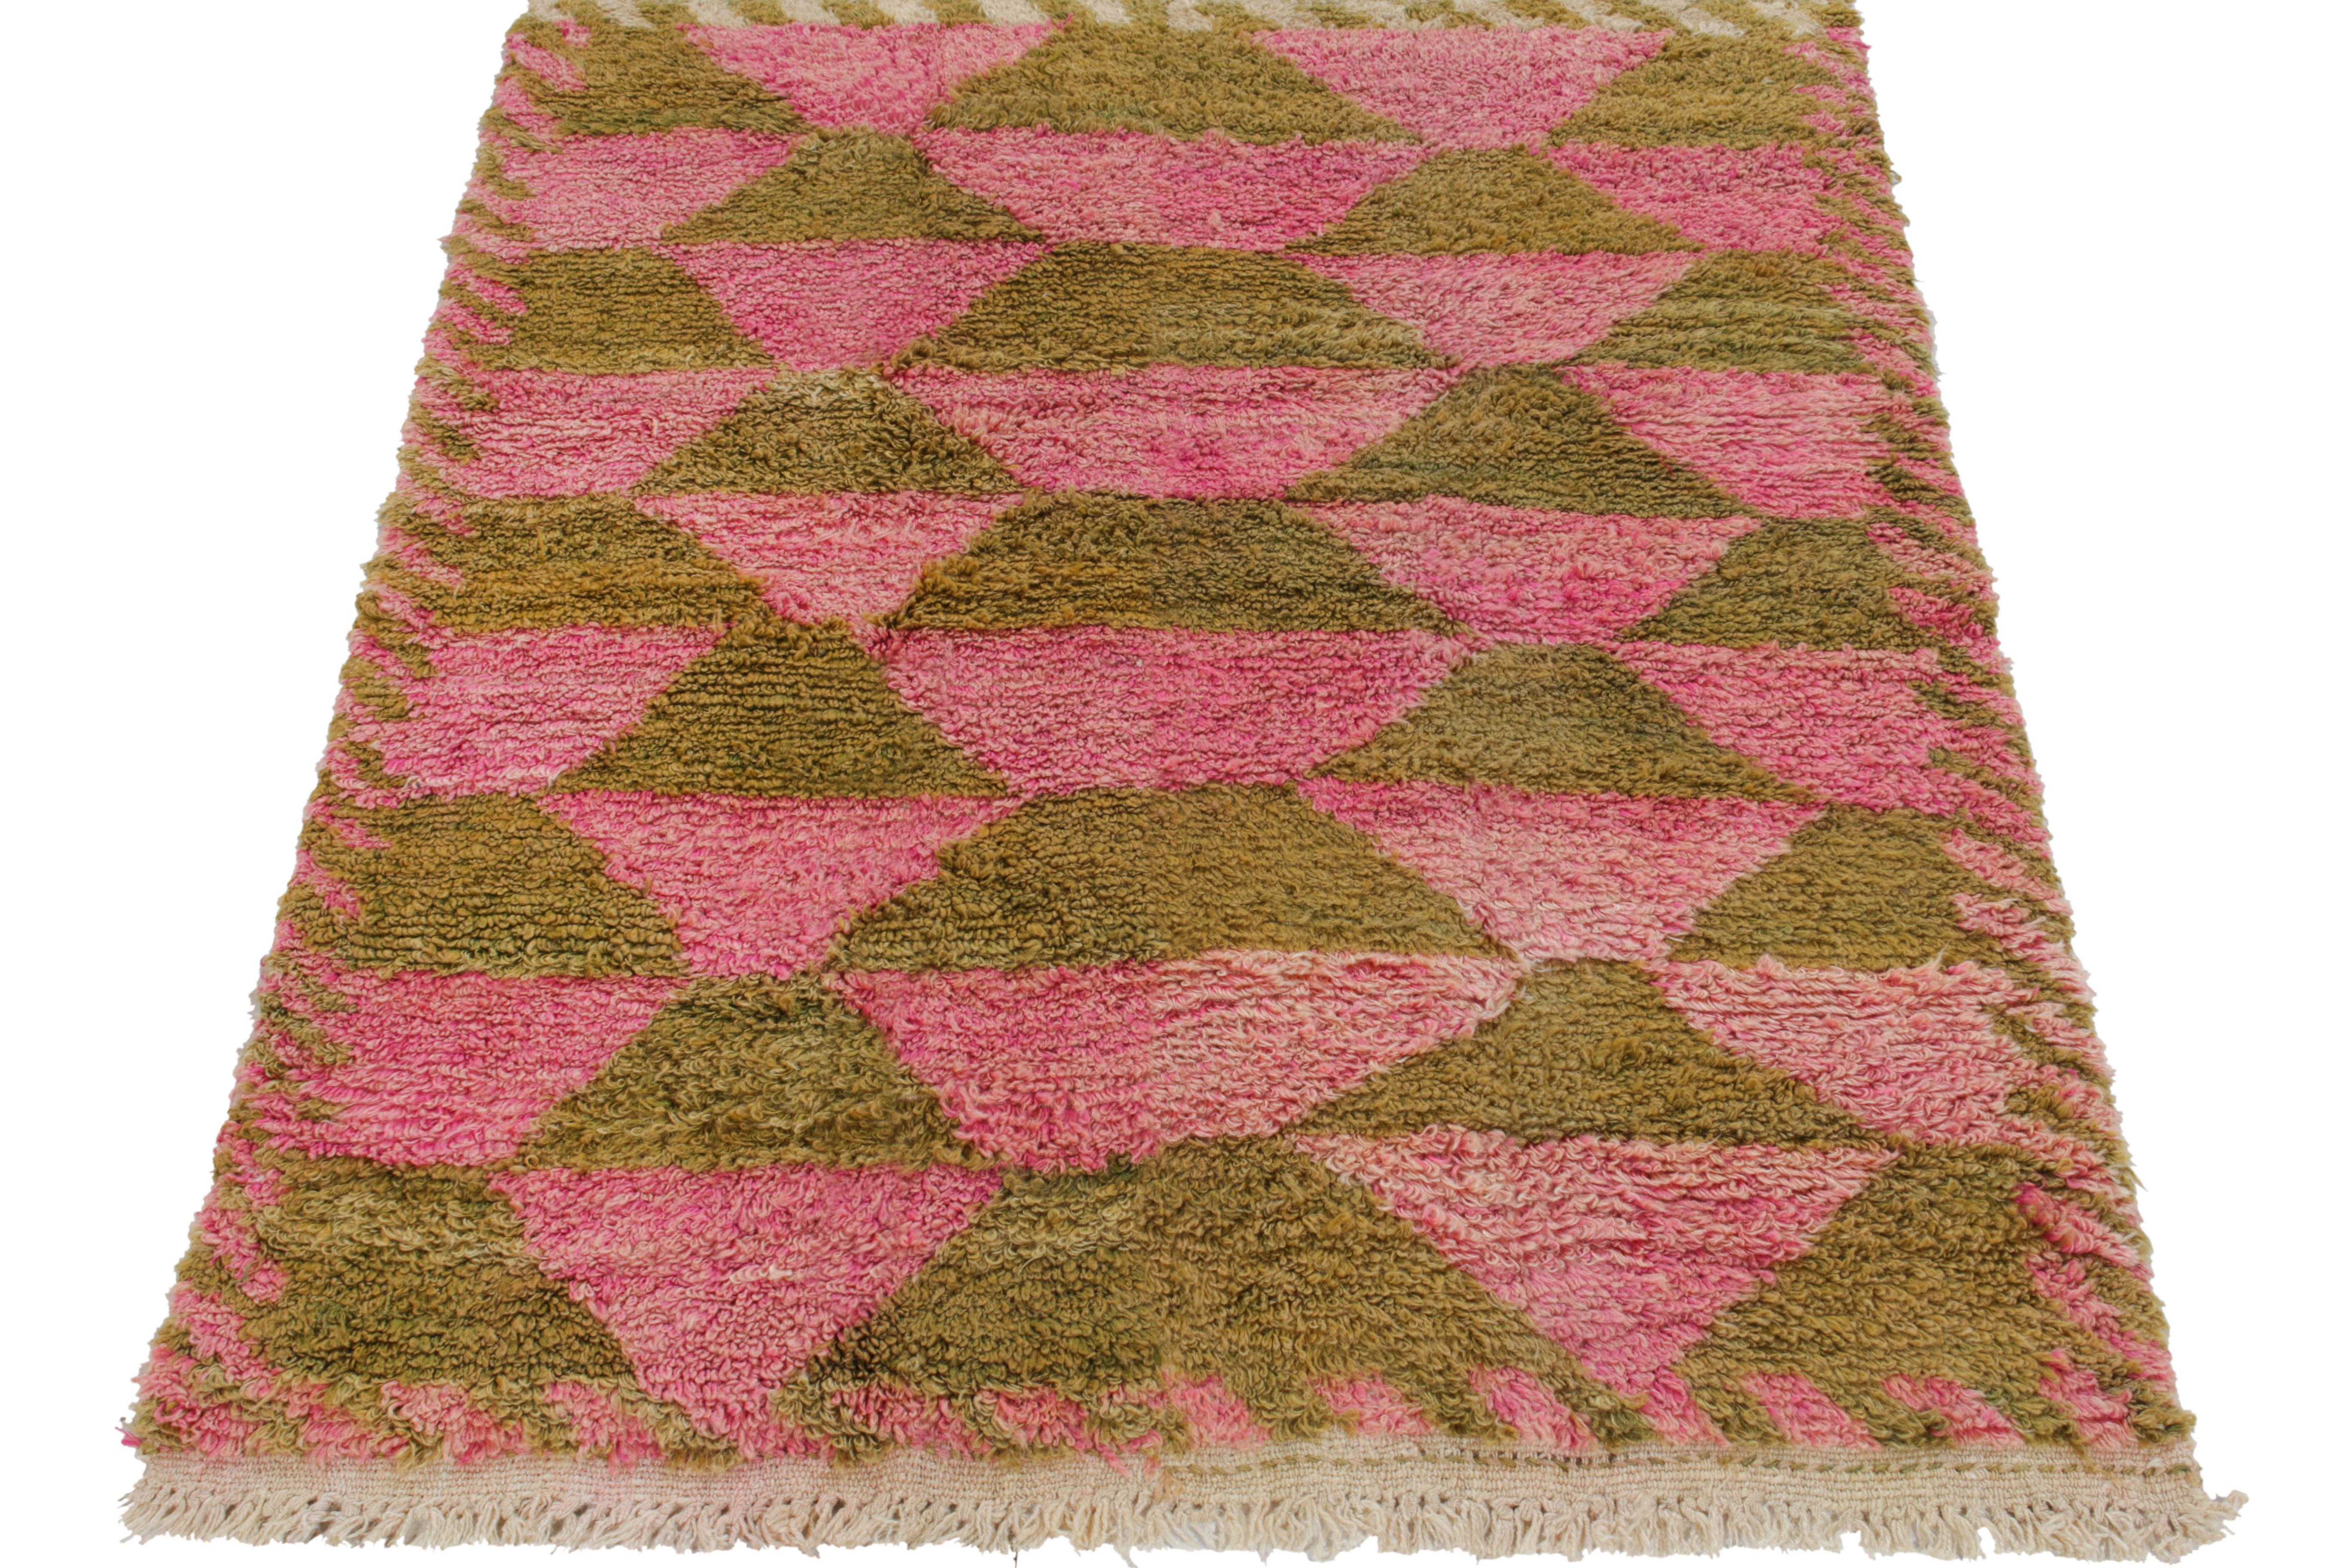 Hand-knotted in wool from Turkey circa 1950-1960, a 4x5 vintage rug from our Antique & Vintage collection connoting the classic Tulu style with a repetitive tribal geometric pattern in henna green & candy floss pink engulfed in an irregular border